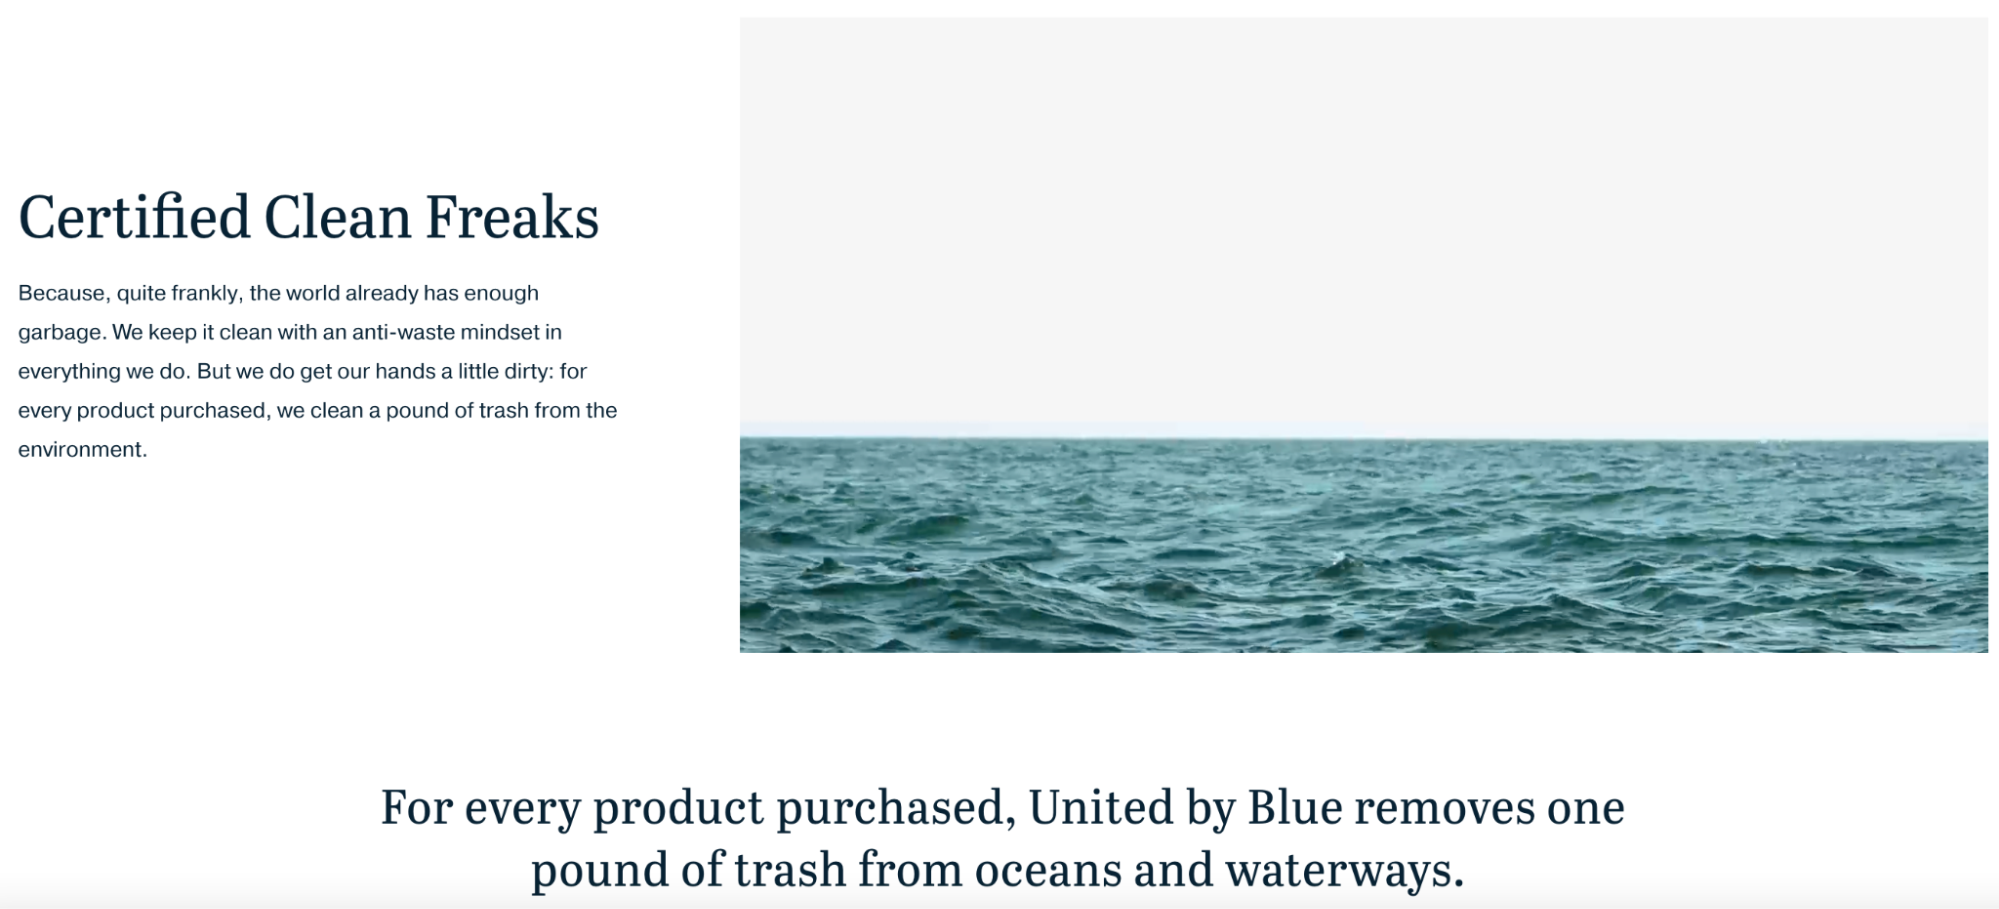 Ocean and text on white background sharing how United by Blue removes a pound of trash from oceans